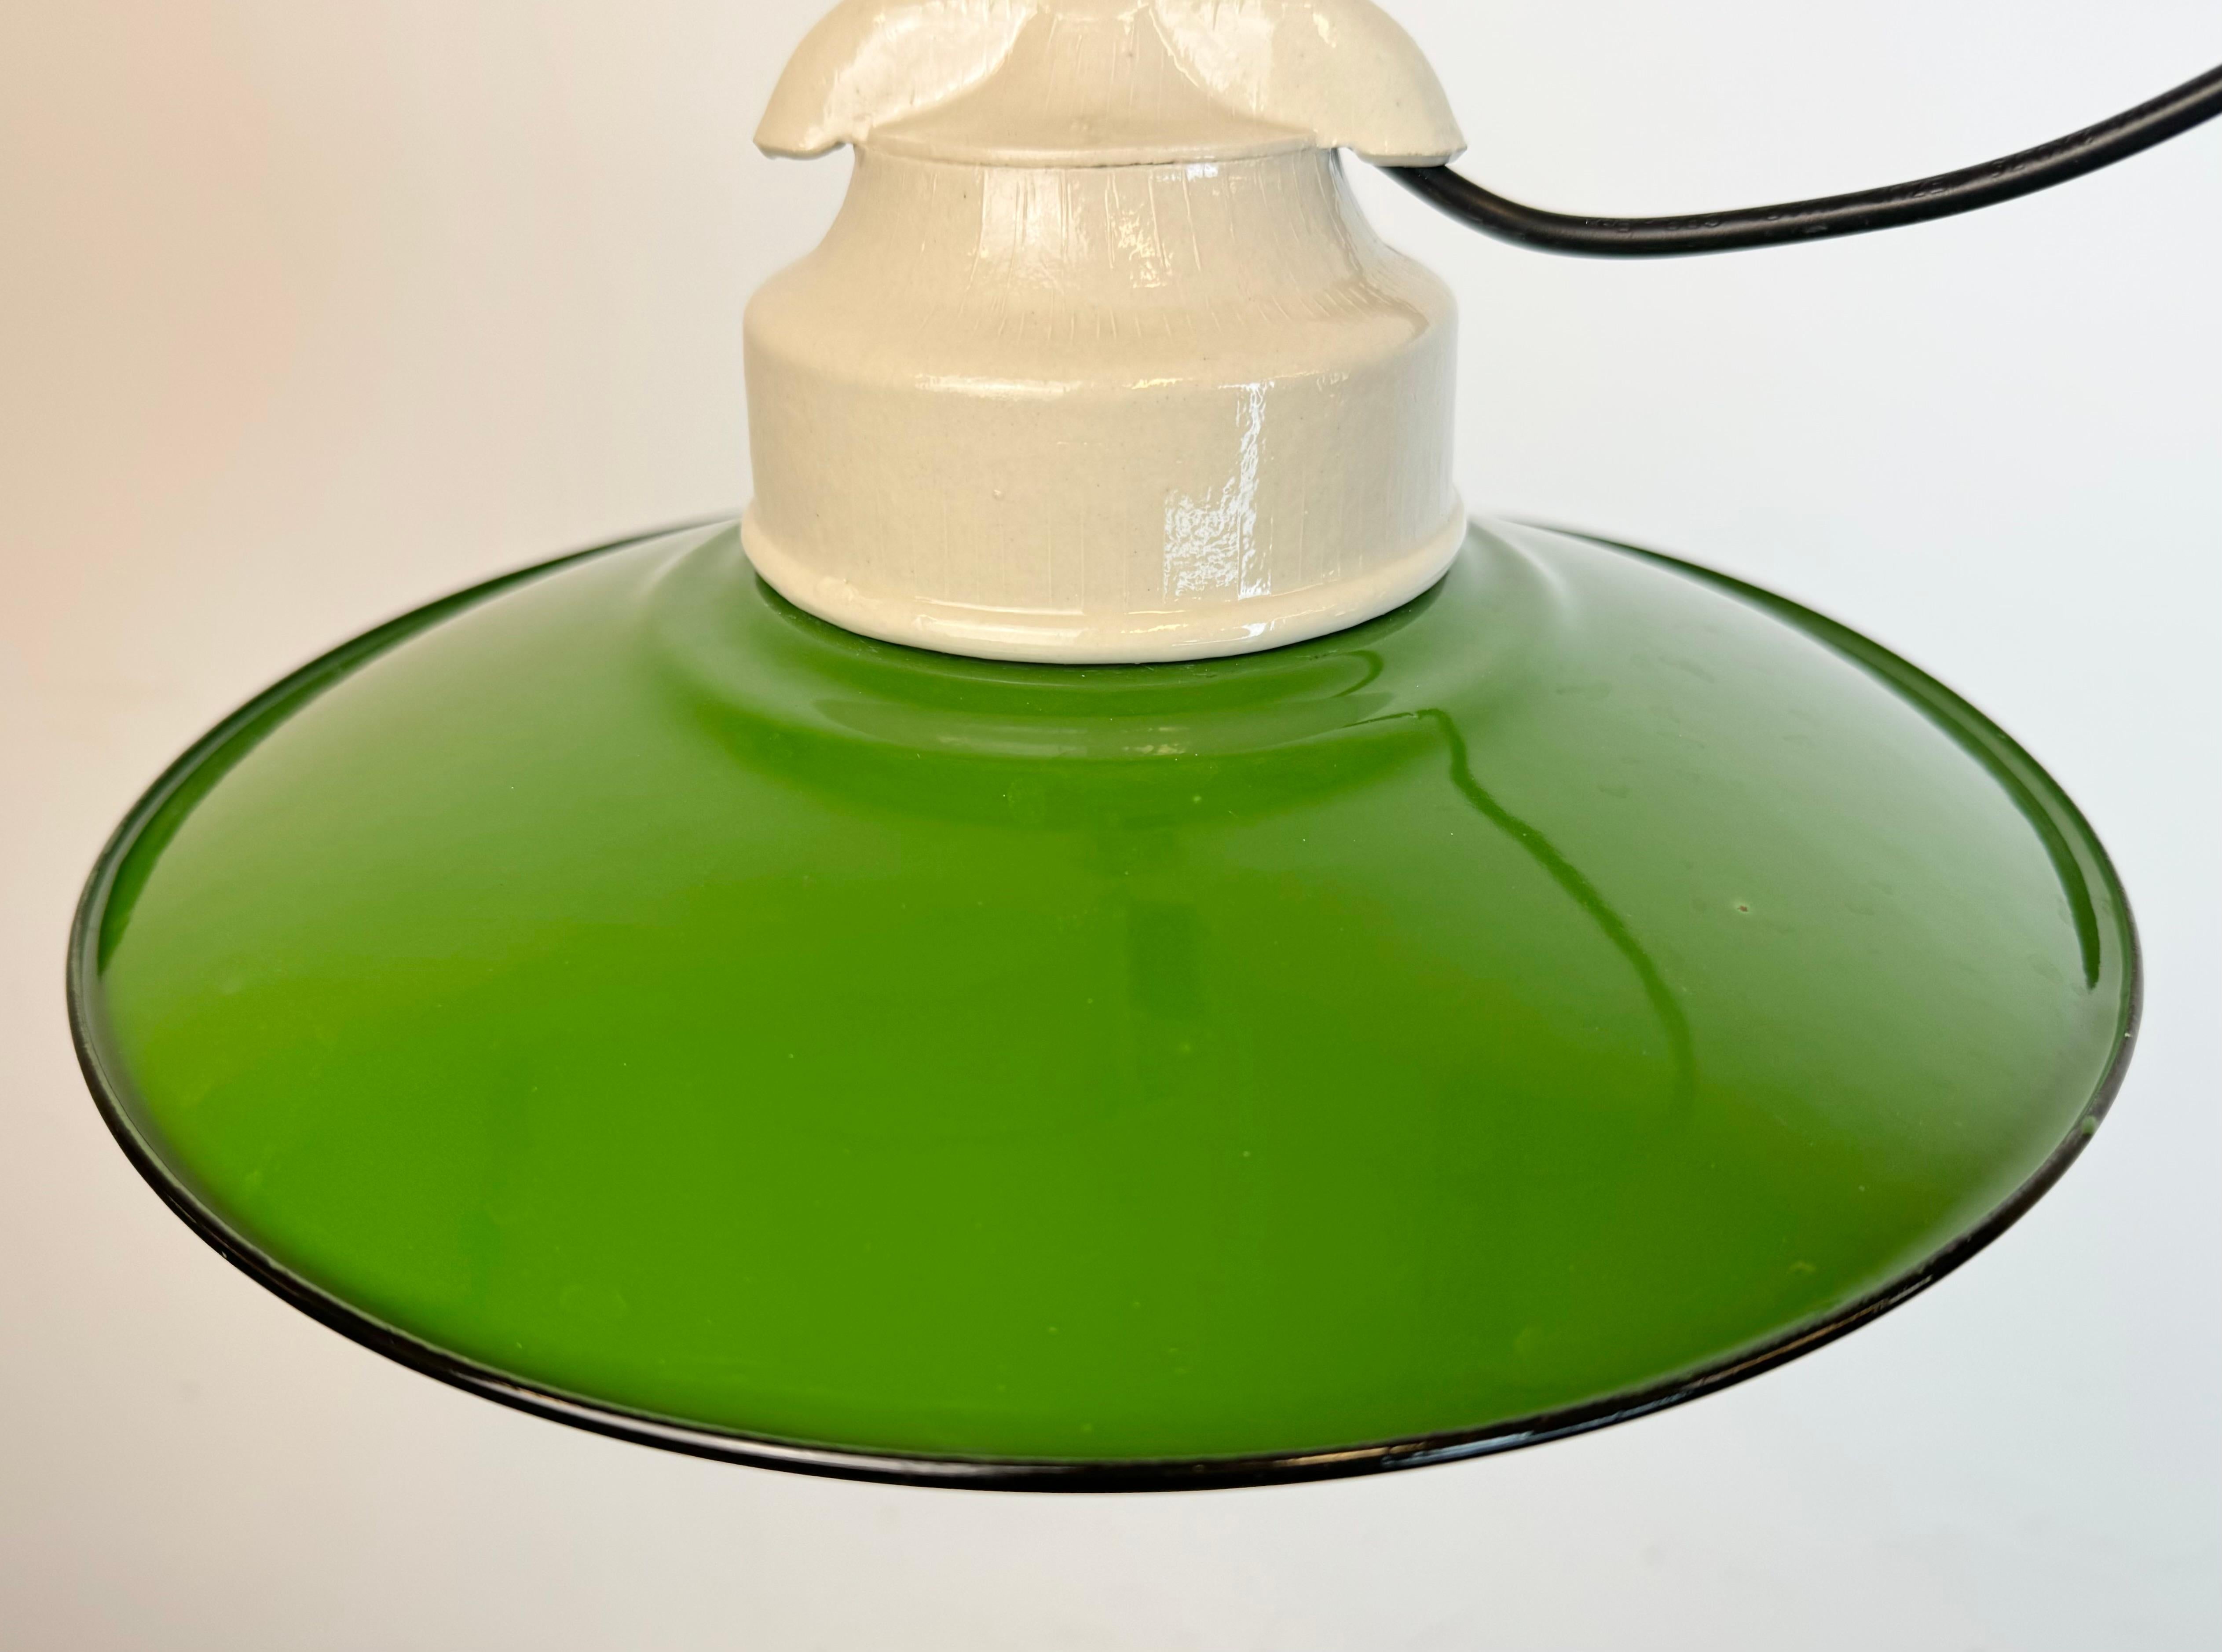 Vintage Porcelain Hanging  Light with Green Enamel Shade, 1970s In Good Condition For Sale In Kojetice, CZ